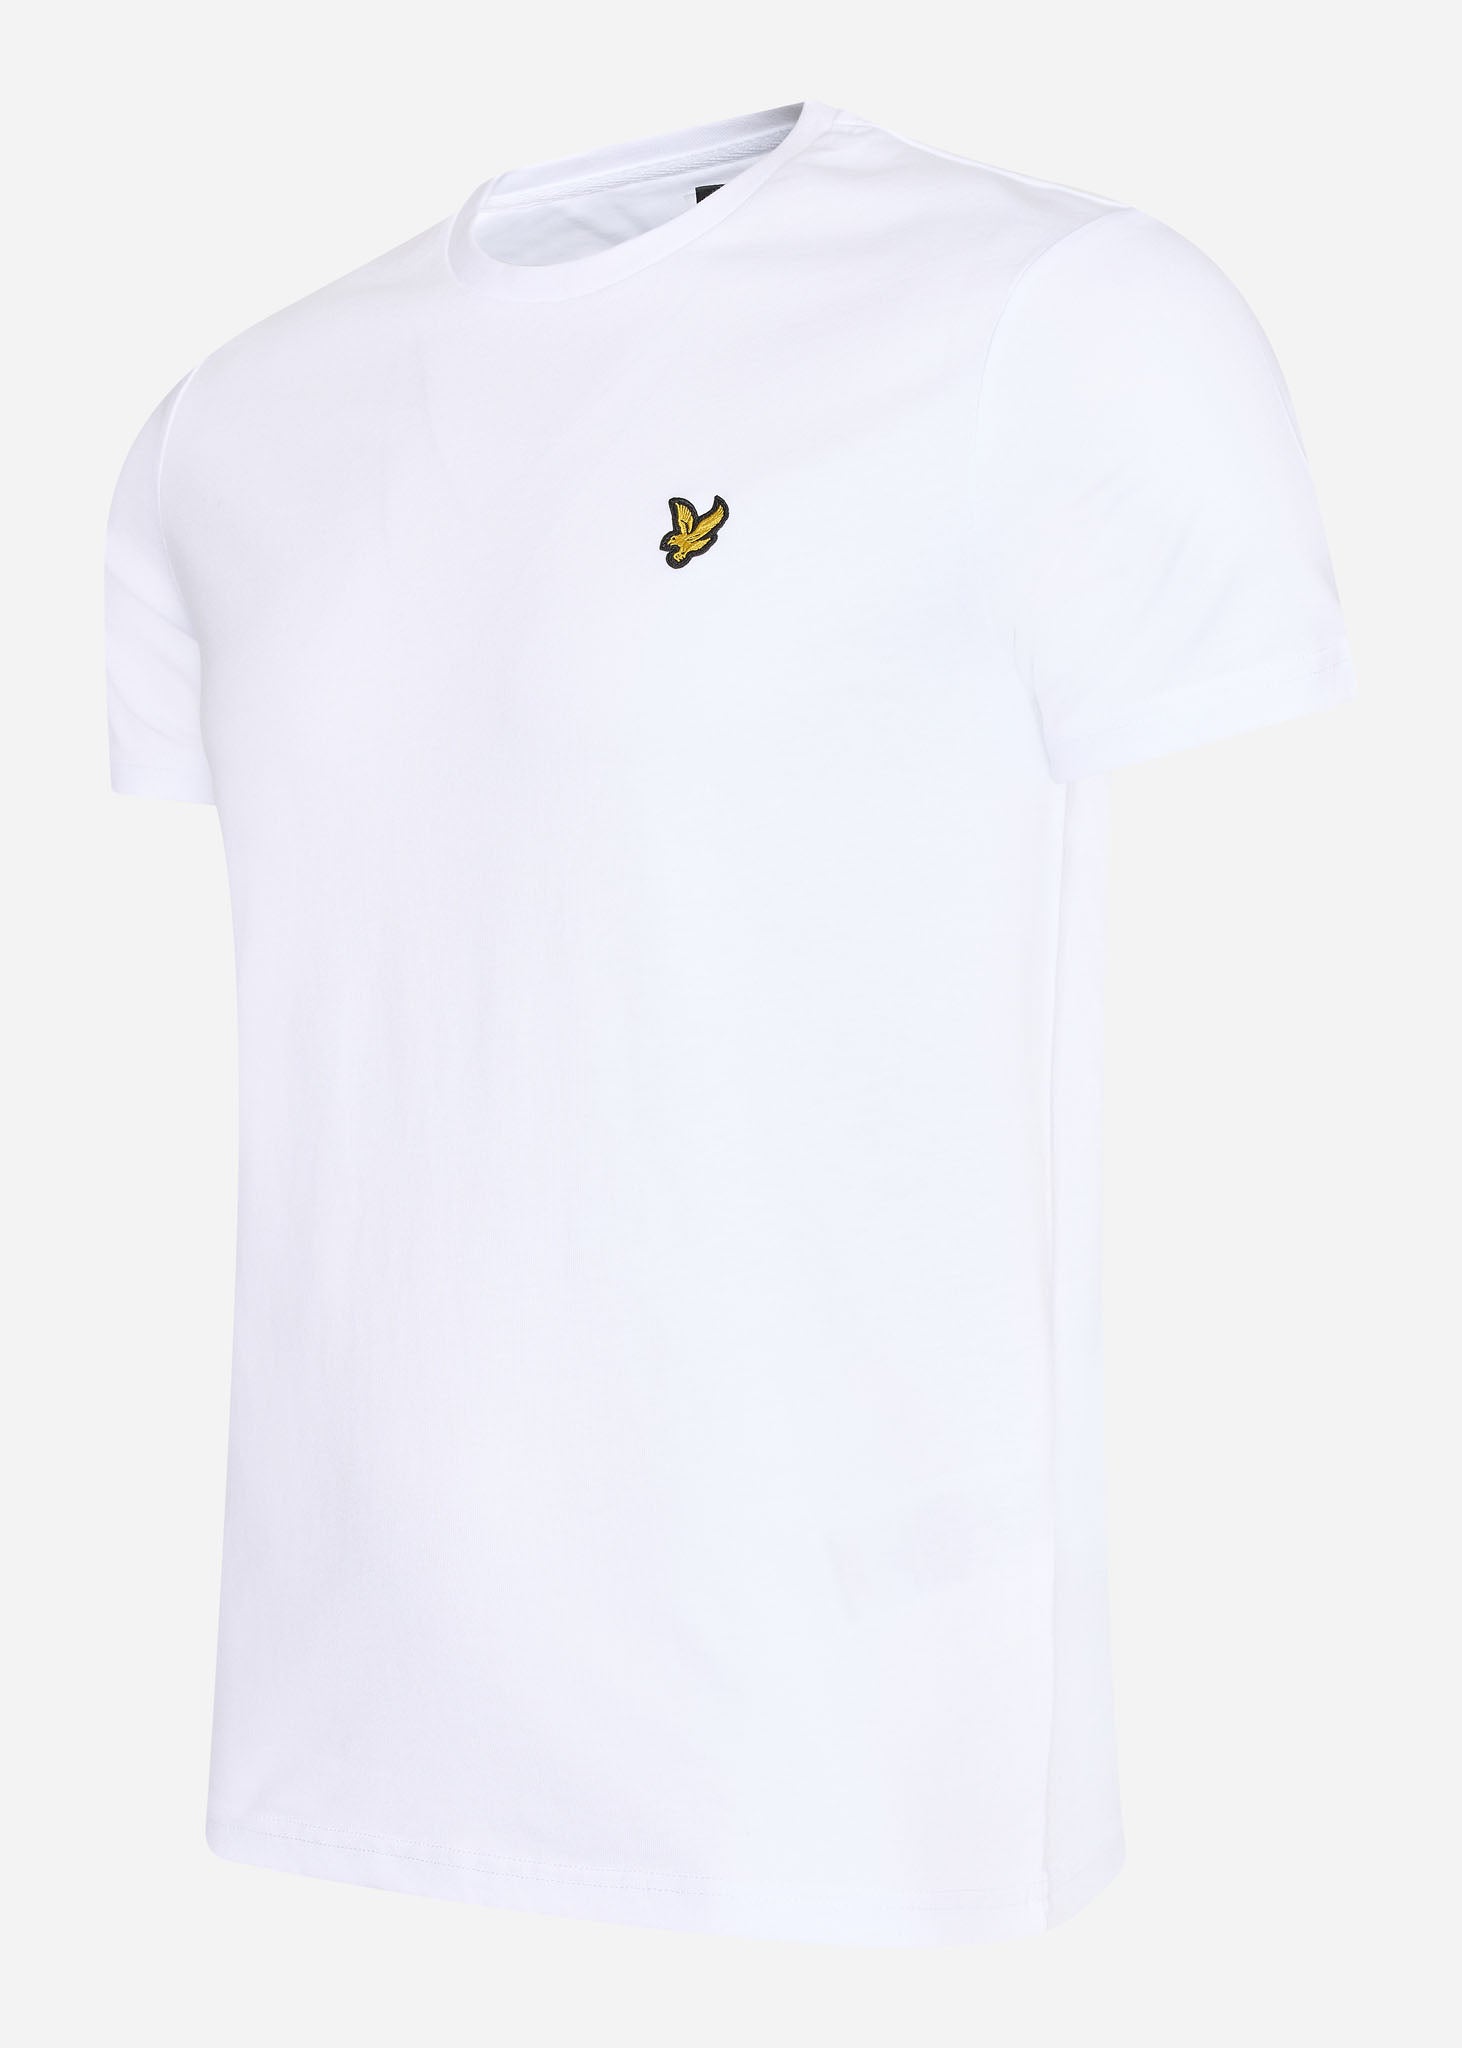 lyle and scott 3 pack t-shirt